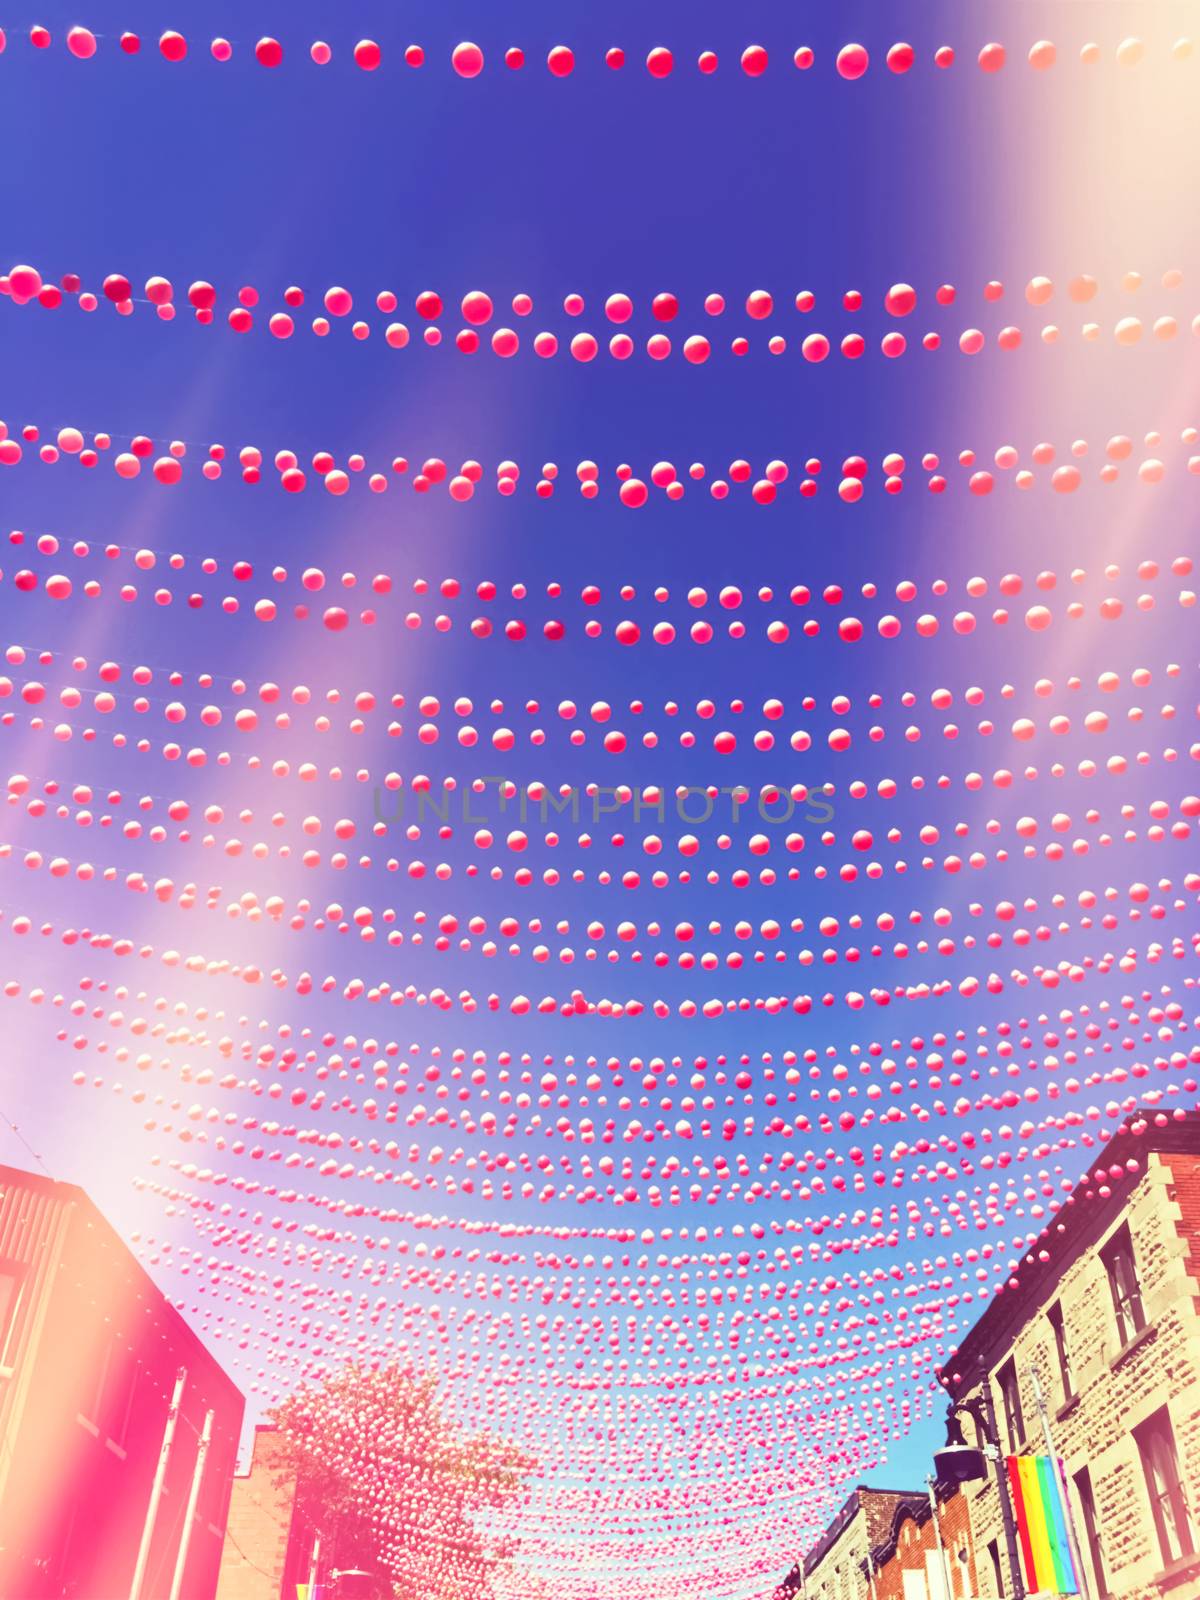 Retro style image of a street in gay neighborhood decorated with pink balls, with light leaks effect. Annual summer installation in gay village on Ste-Catherine street, Montreal (Quebec, Canada).